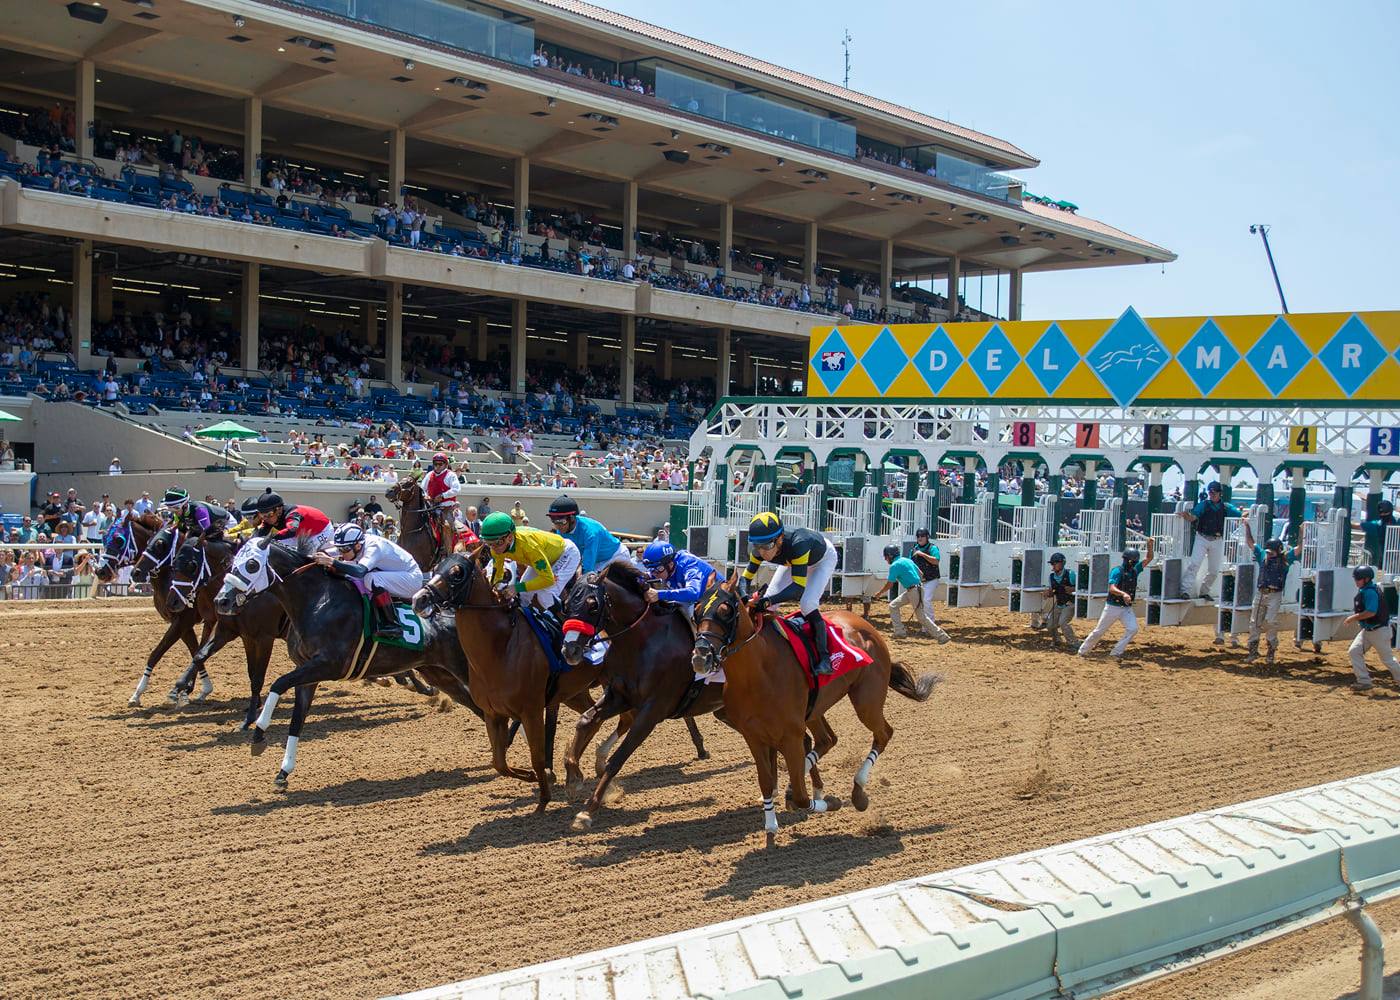 Del Mar Record Purses for 2022 Meet will be Highest in History of